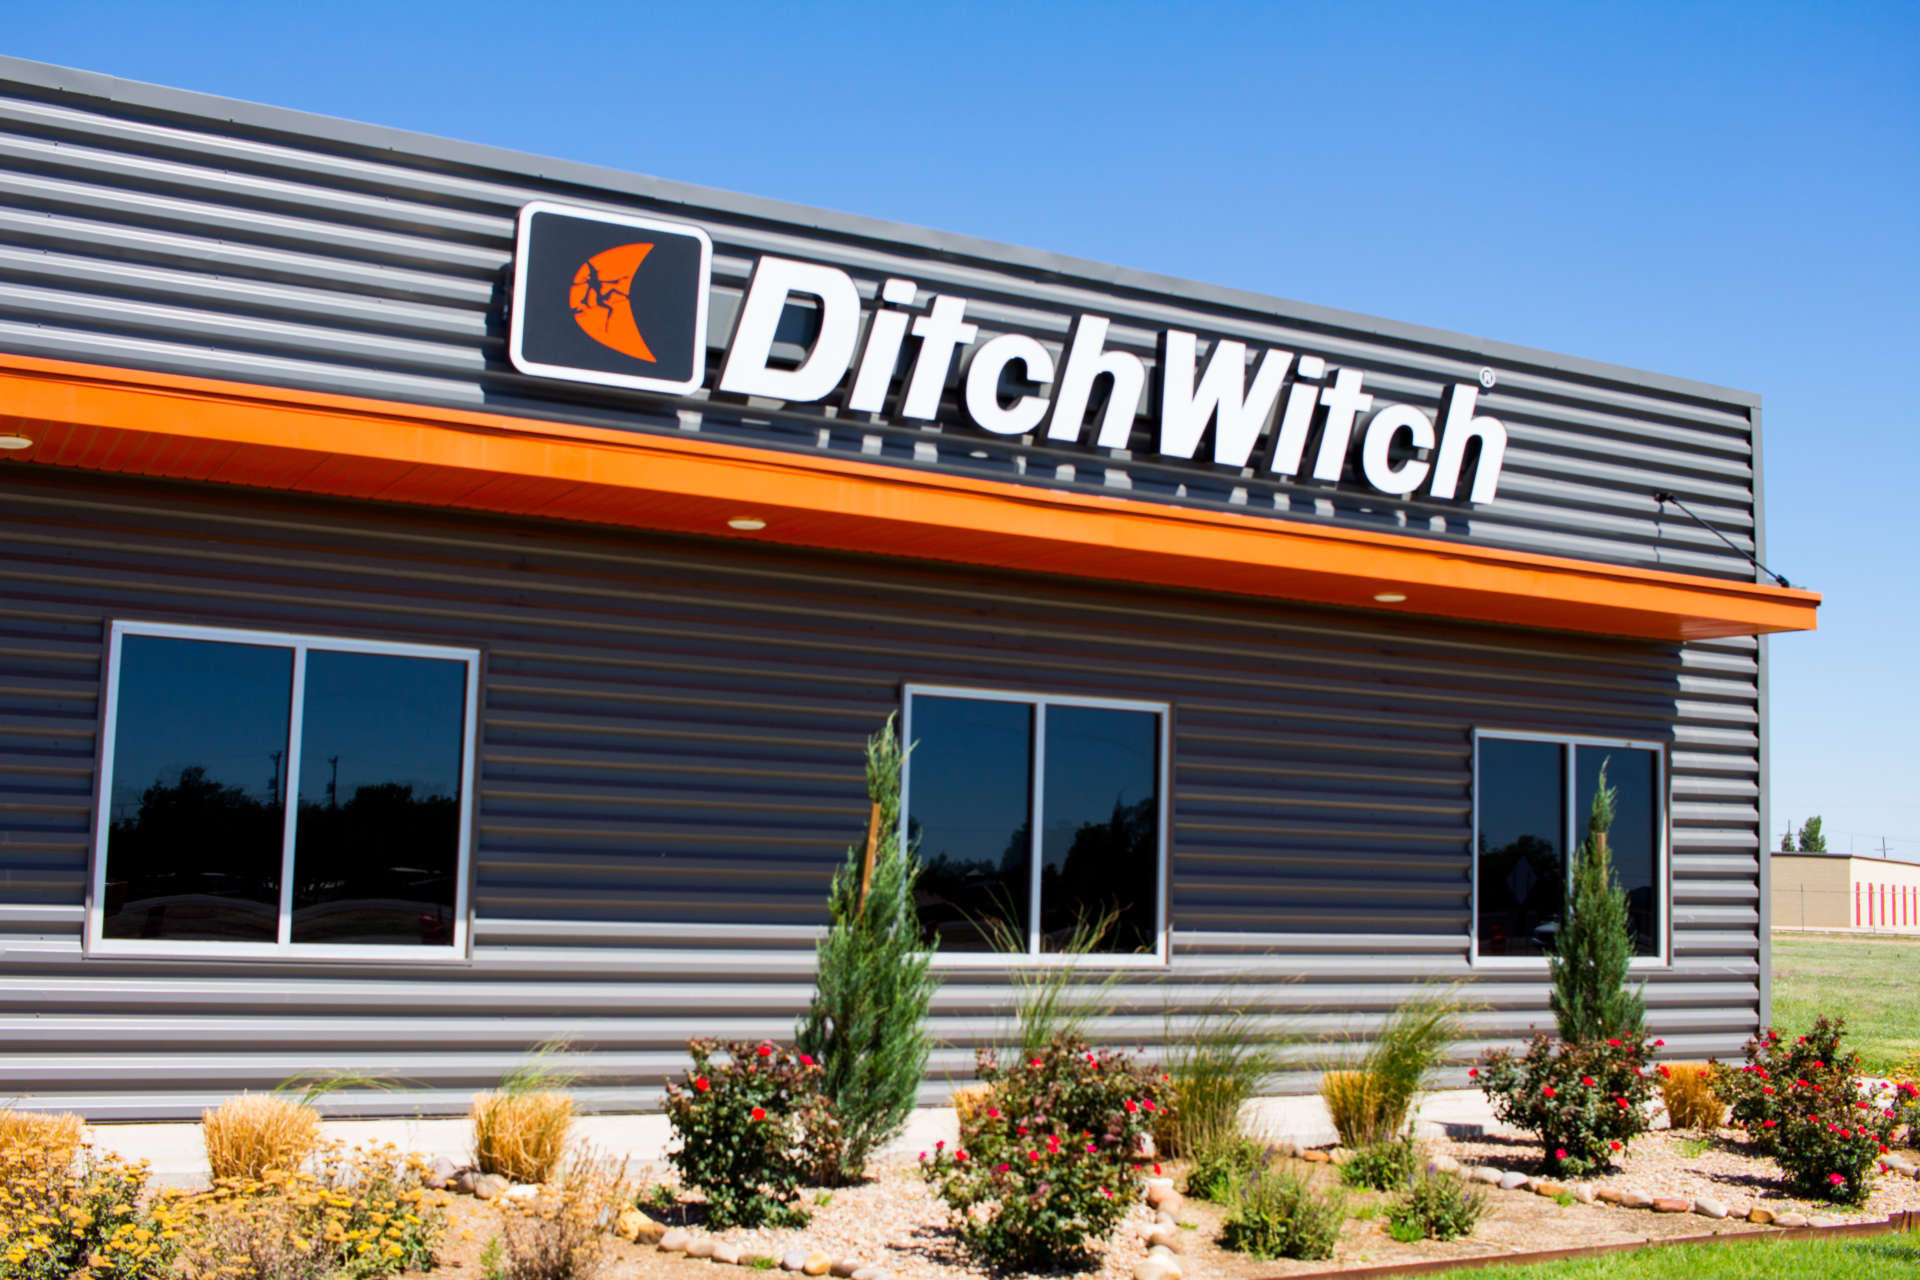 Ditch Witch from the front of building with rocks and landscaping